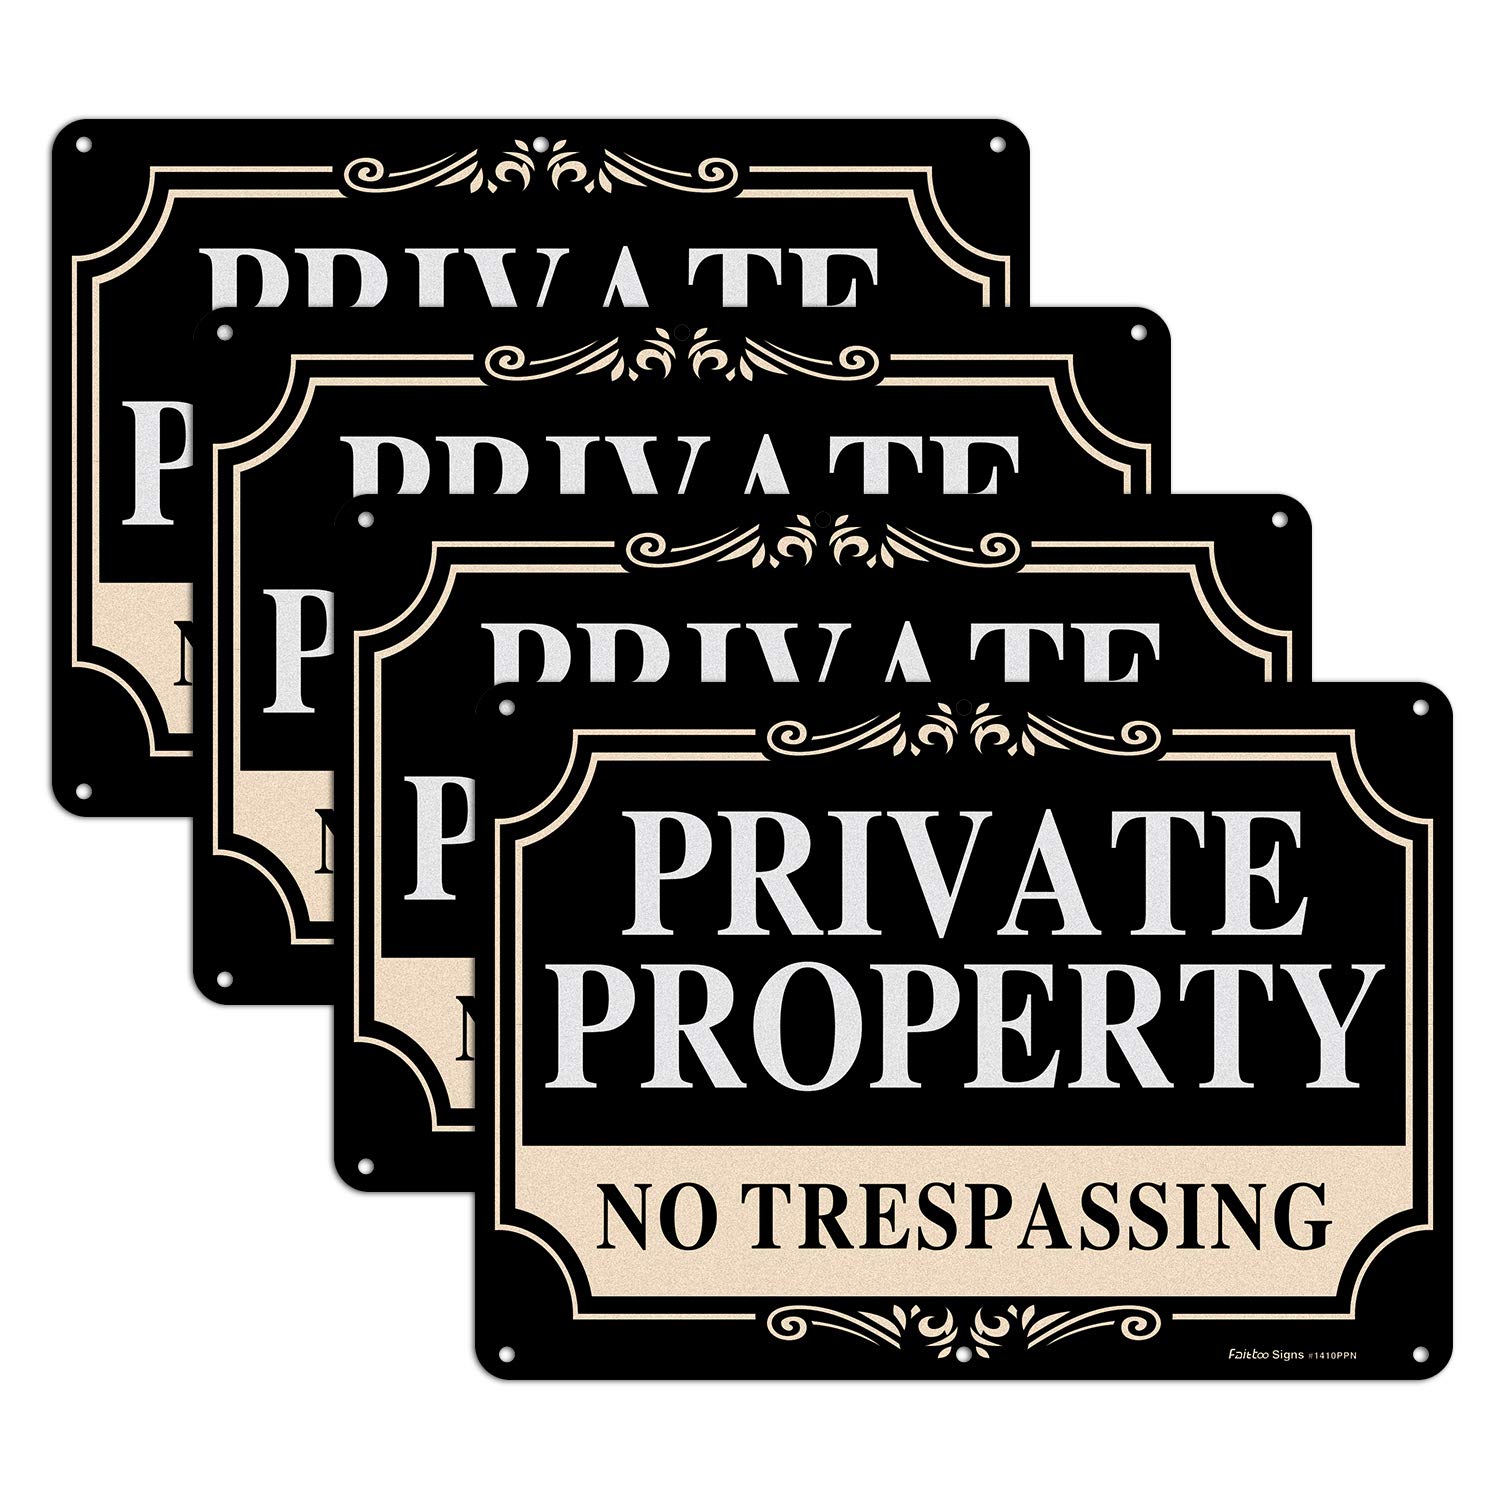 Faittoo No Trespassing Signs Private Property Signs,14X10 Inch Rust Free Aluminum Metal Sign,Reflective,Fade Resistant,Uv Protected,Weat